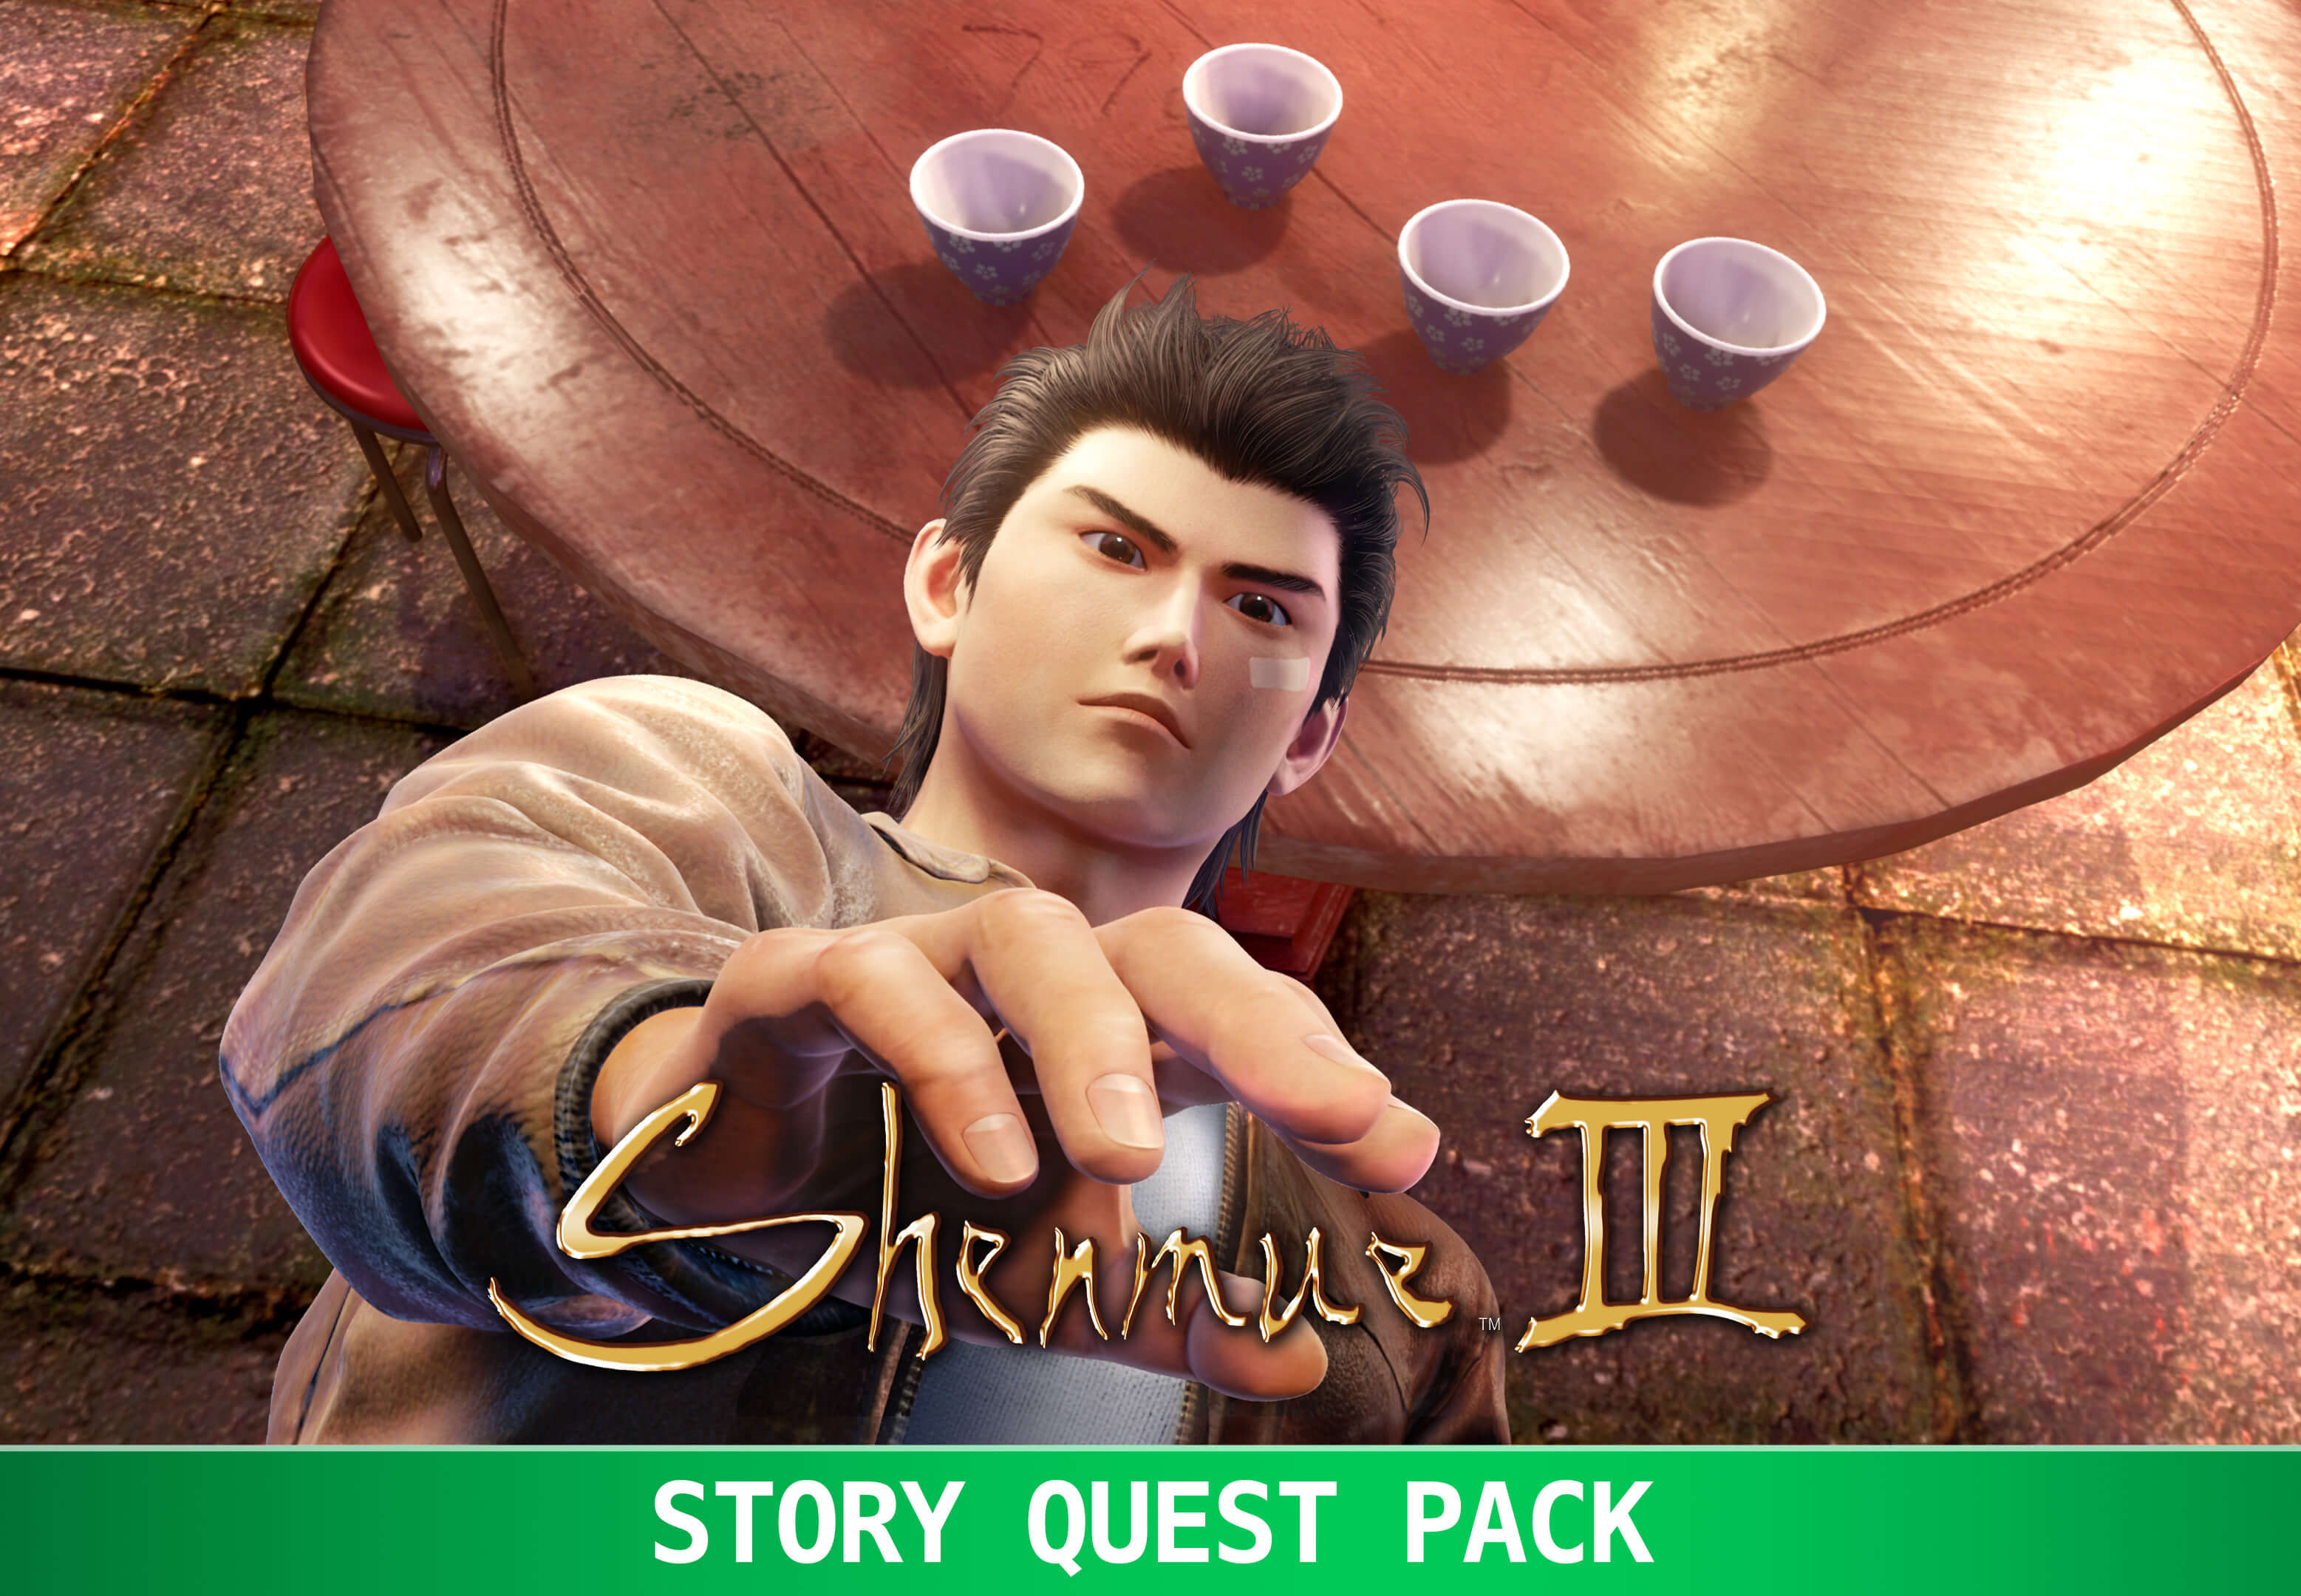 Shenmue III - Story Quest Pack DLC Steam CD Key